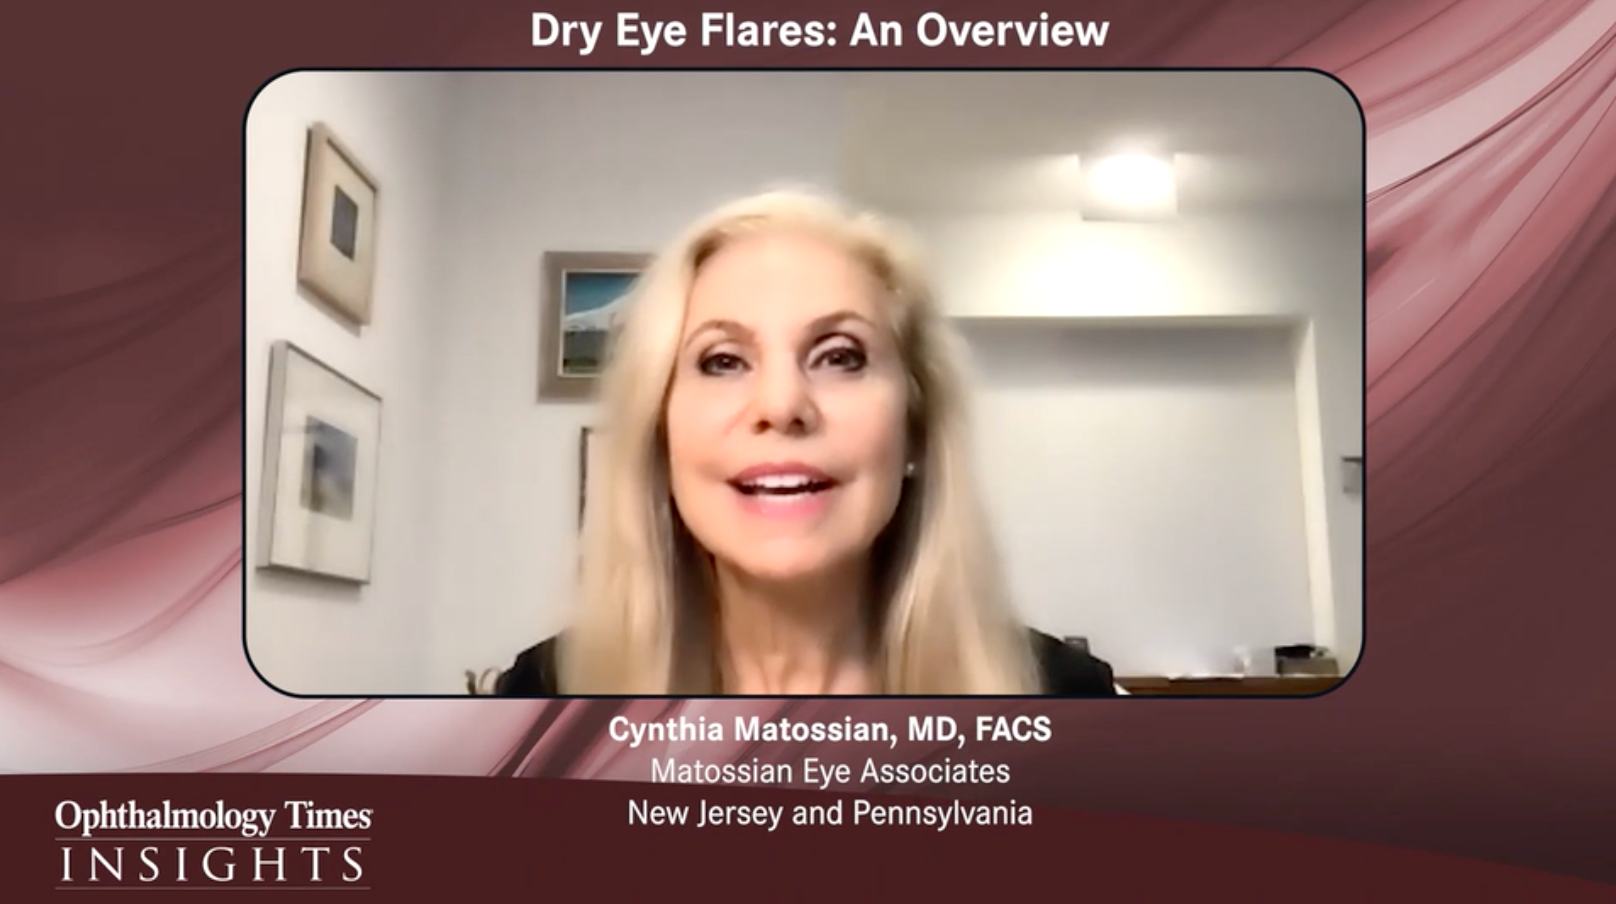 Cynthia Matossian, MD, discussed DED flares, and their detection and management, in an interview for Ophthalmology Times®/Optometry Times.®